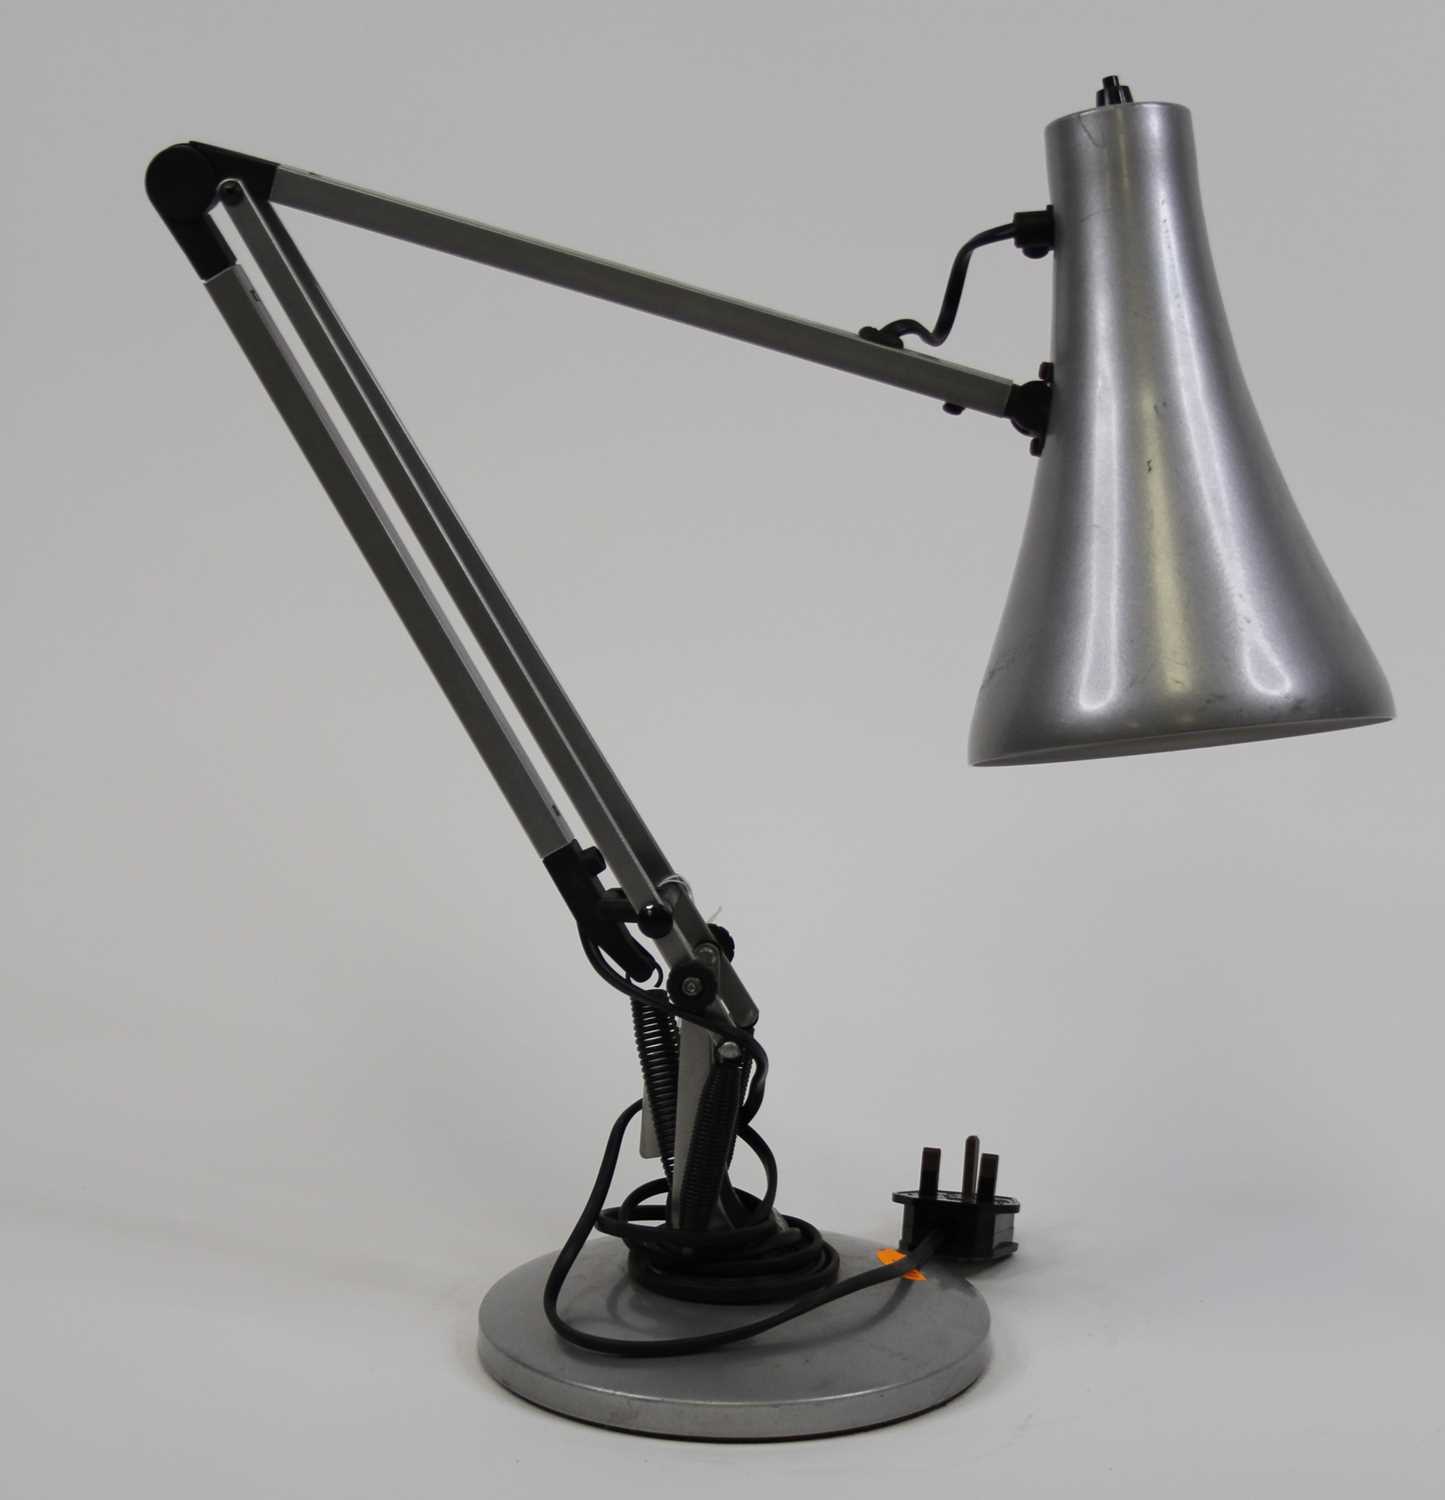 A 20th century silver painted metal anglepoise desk lamp